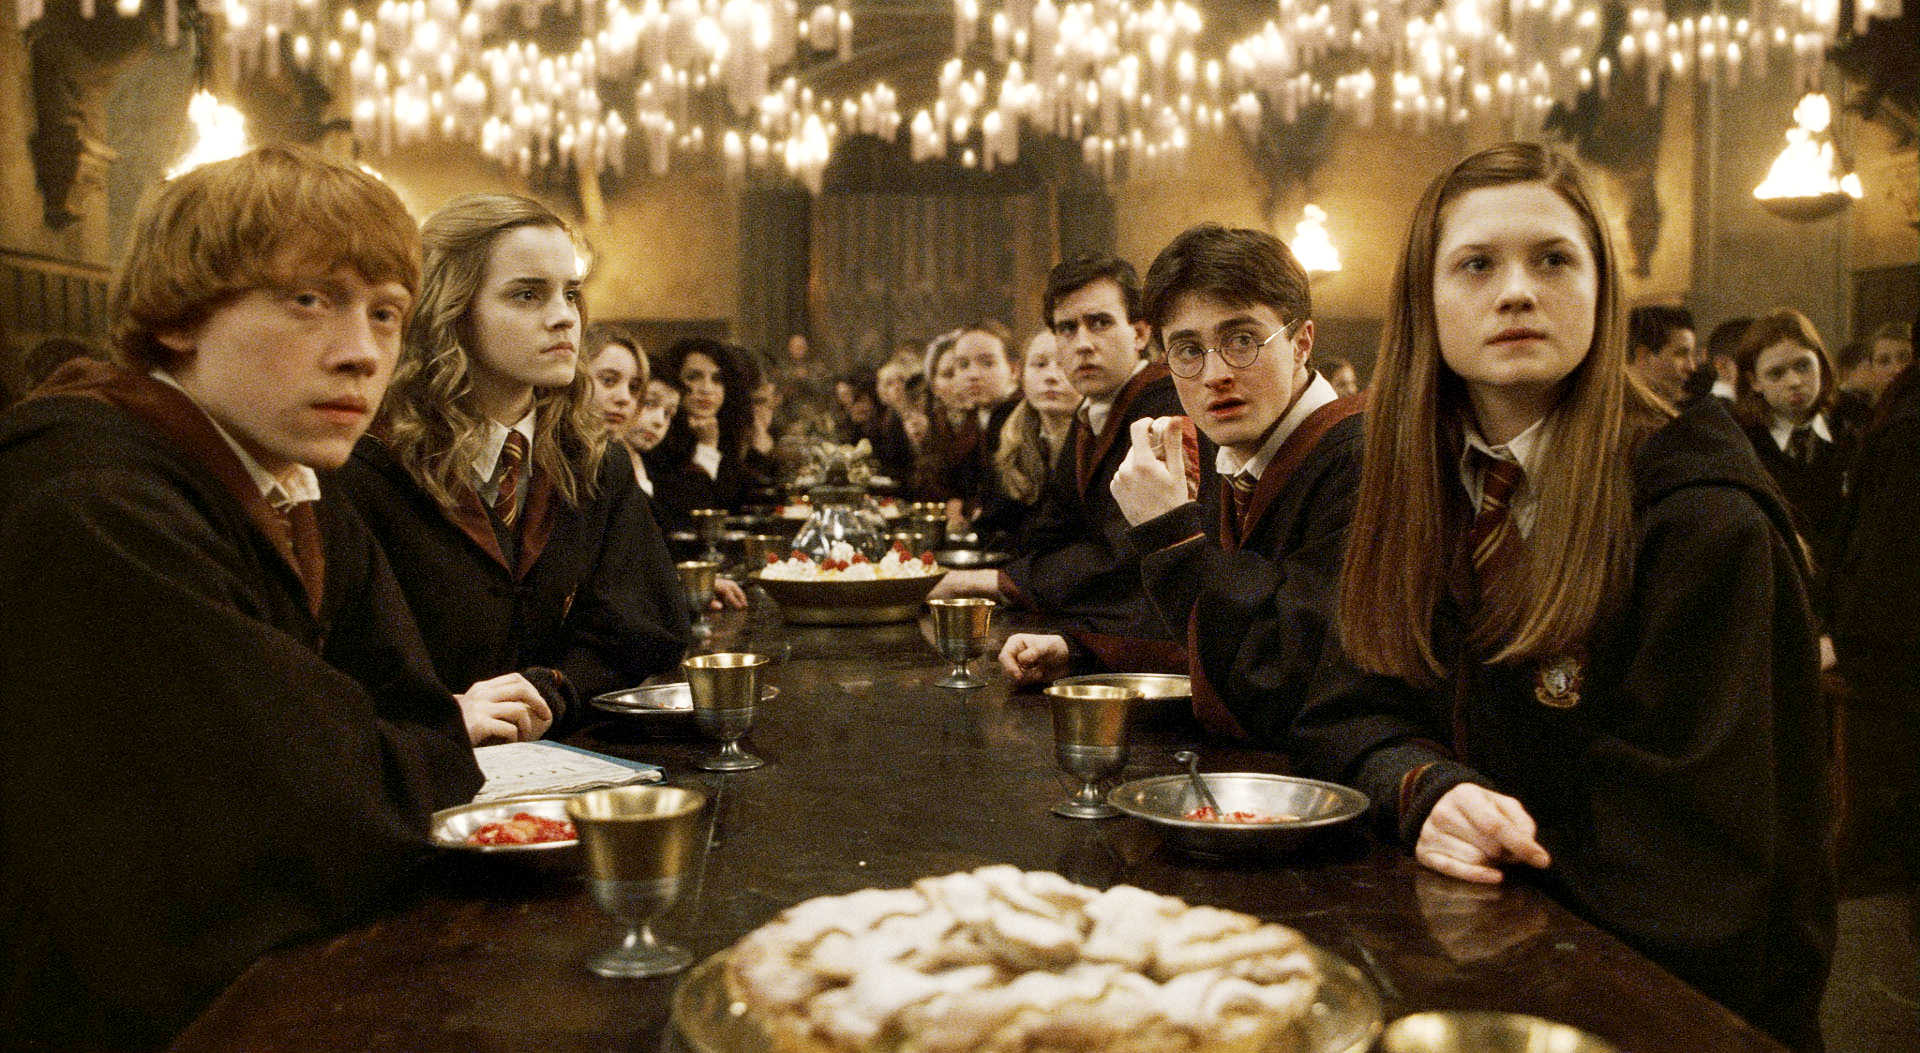 Rupert Grint, Emma Watson, Daniel Radcliffe and Bonnie Wright in Warner Bros' Harry Potter and the Half-Blood Prince (2009)